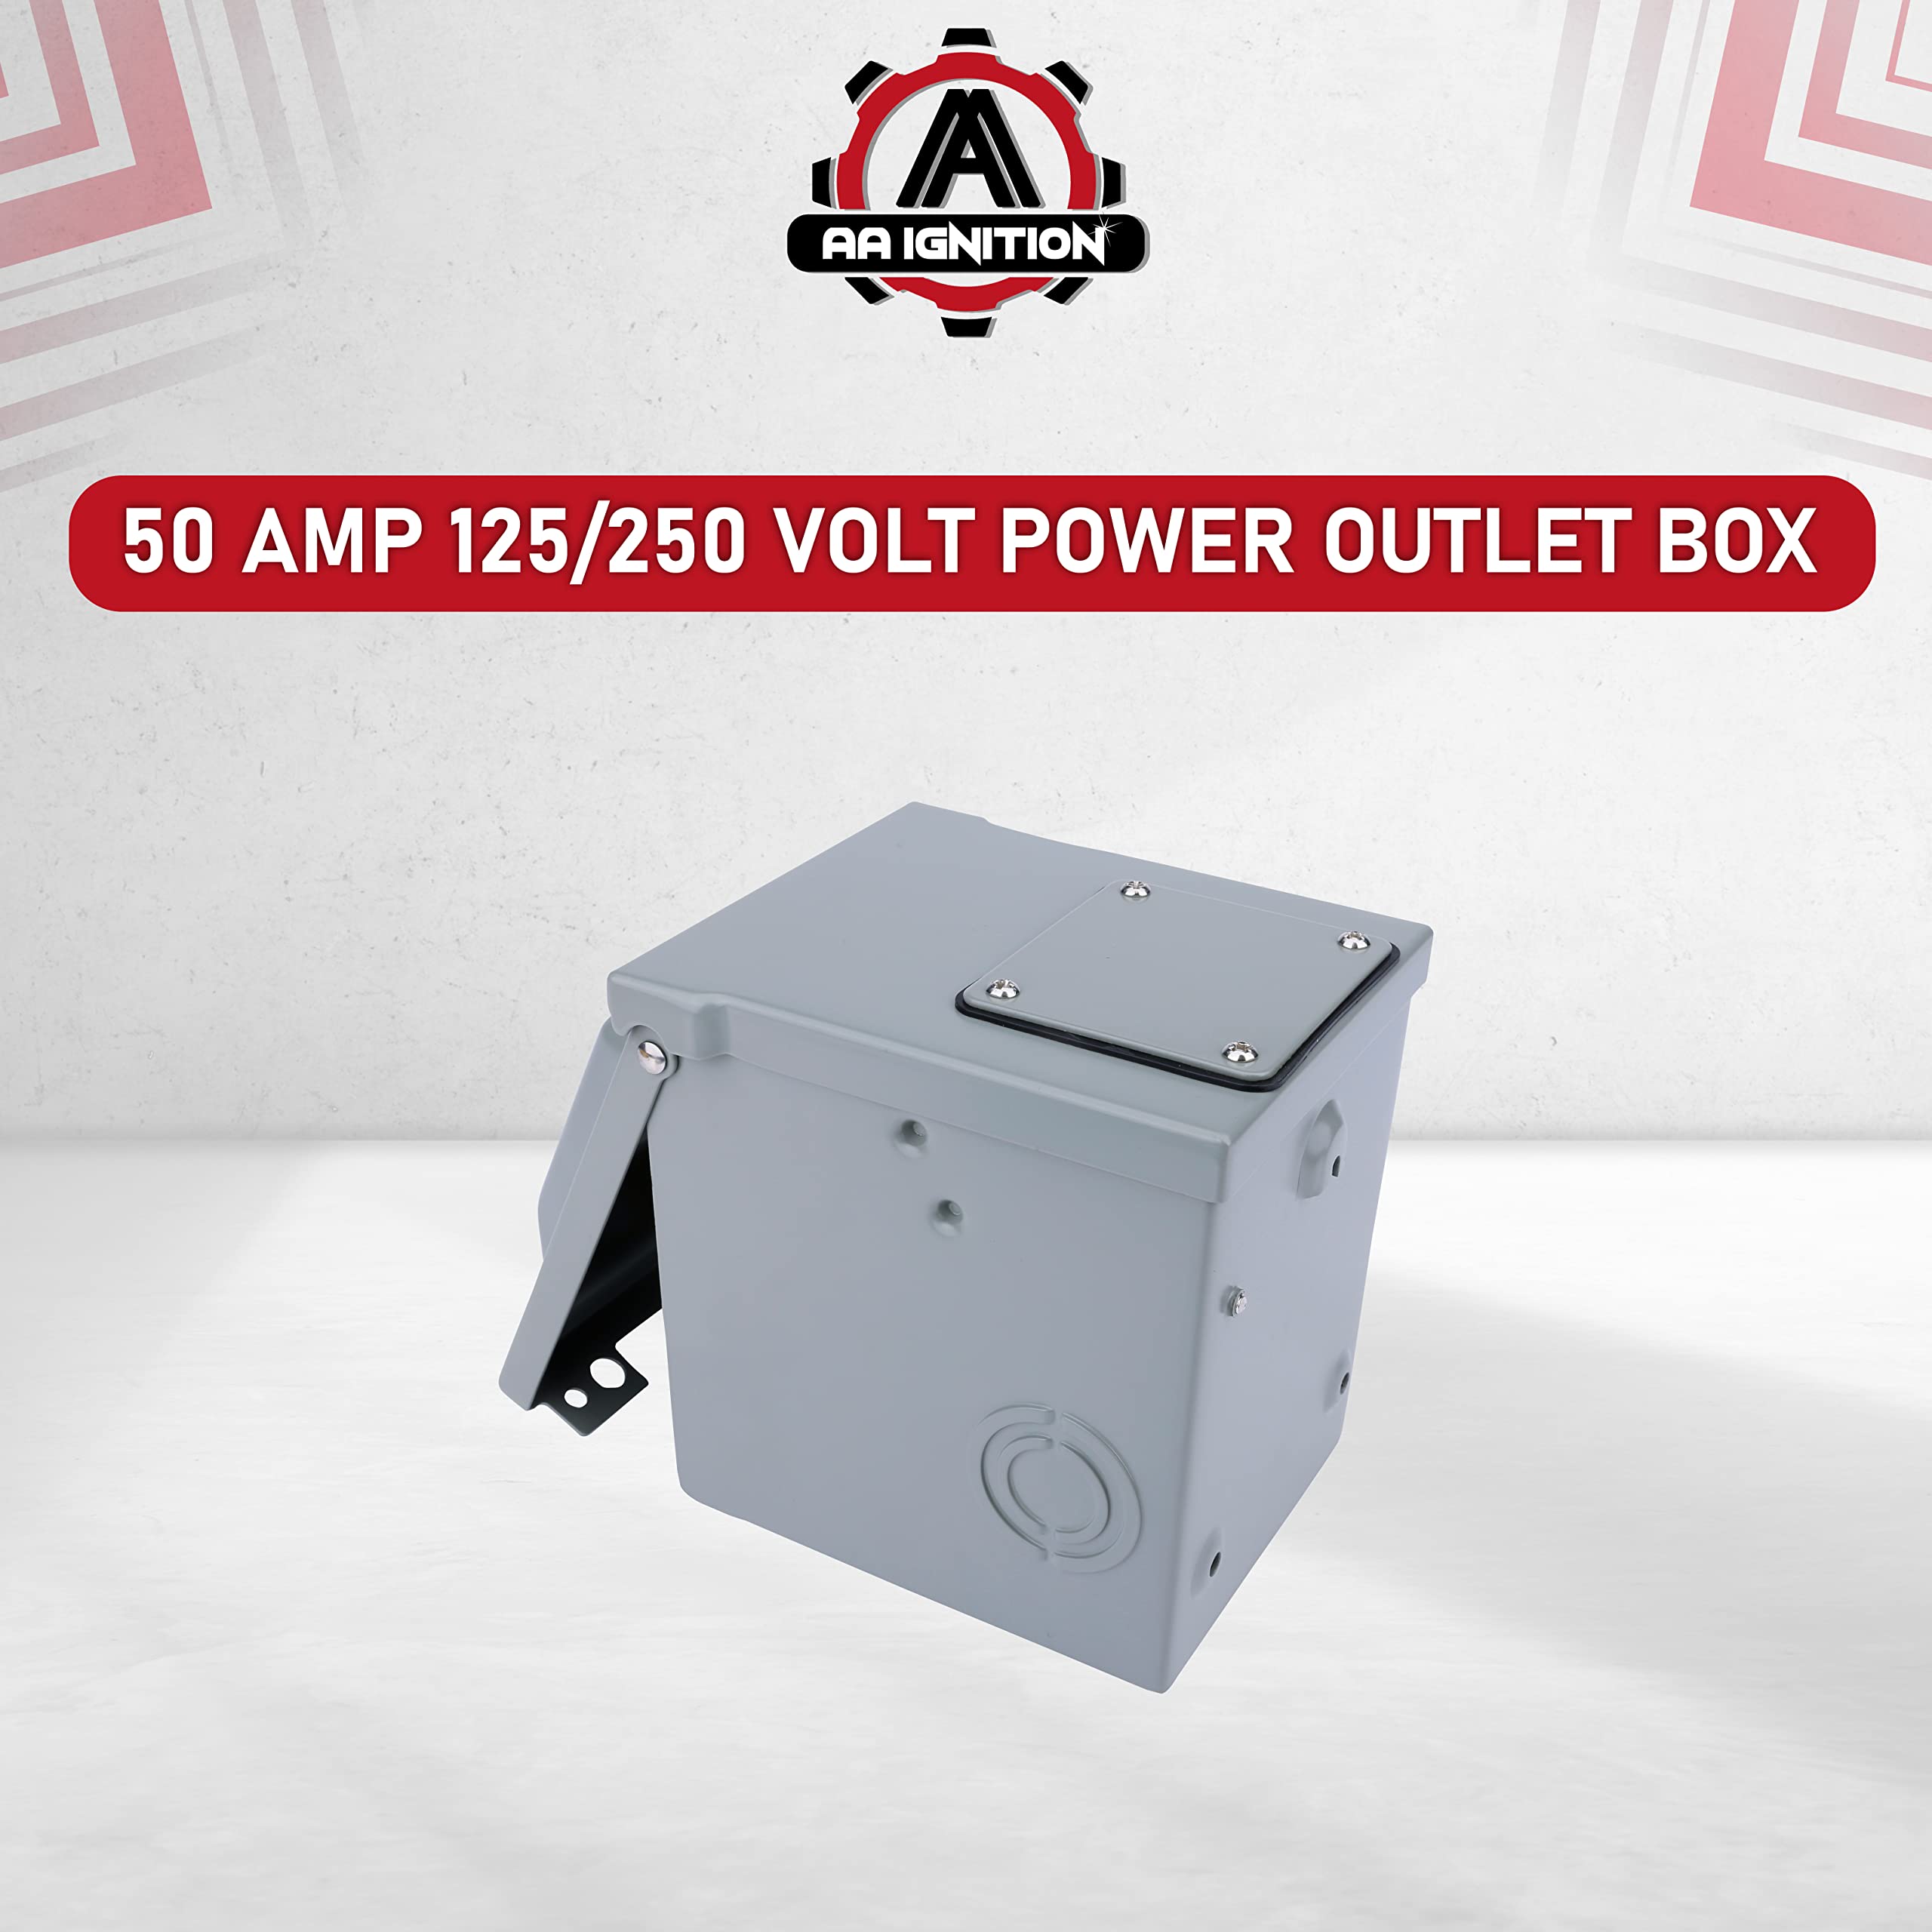 50 Amp 125/250 Volt Power Outlet Box, Enclosed Lockable - for RV, Campers, Motorhome, Travel Trailer, Electric Cars, Generator - 3R Weatherproof Outdoor - NEMA 14-50R Receptacle Panel  - Very Good